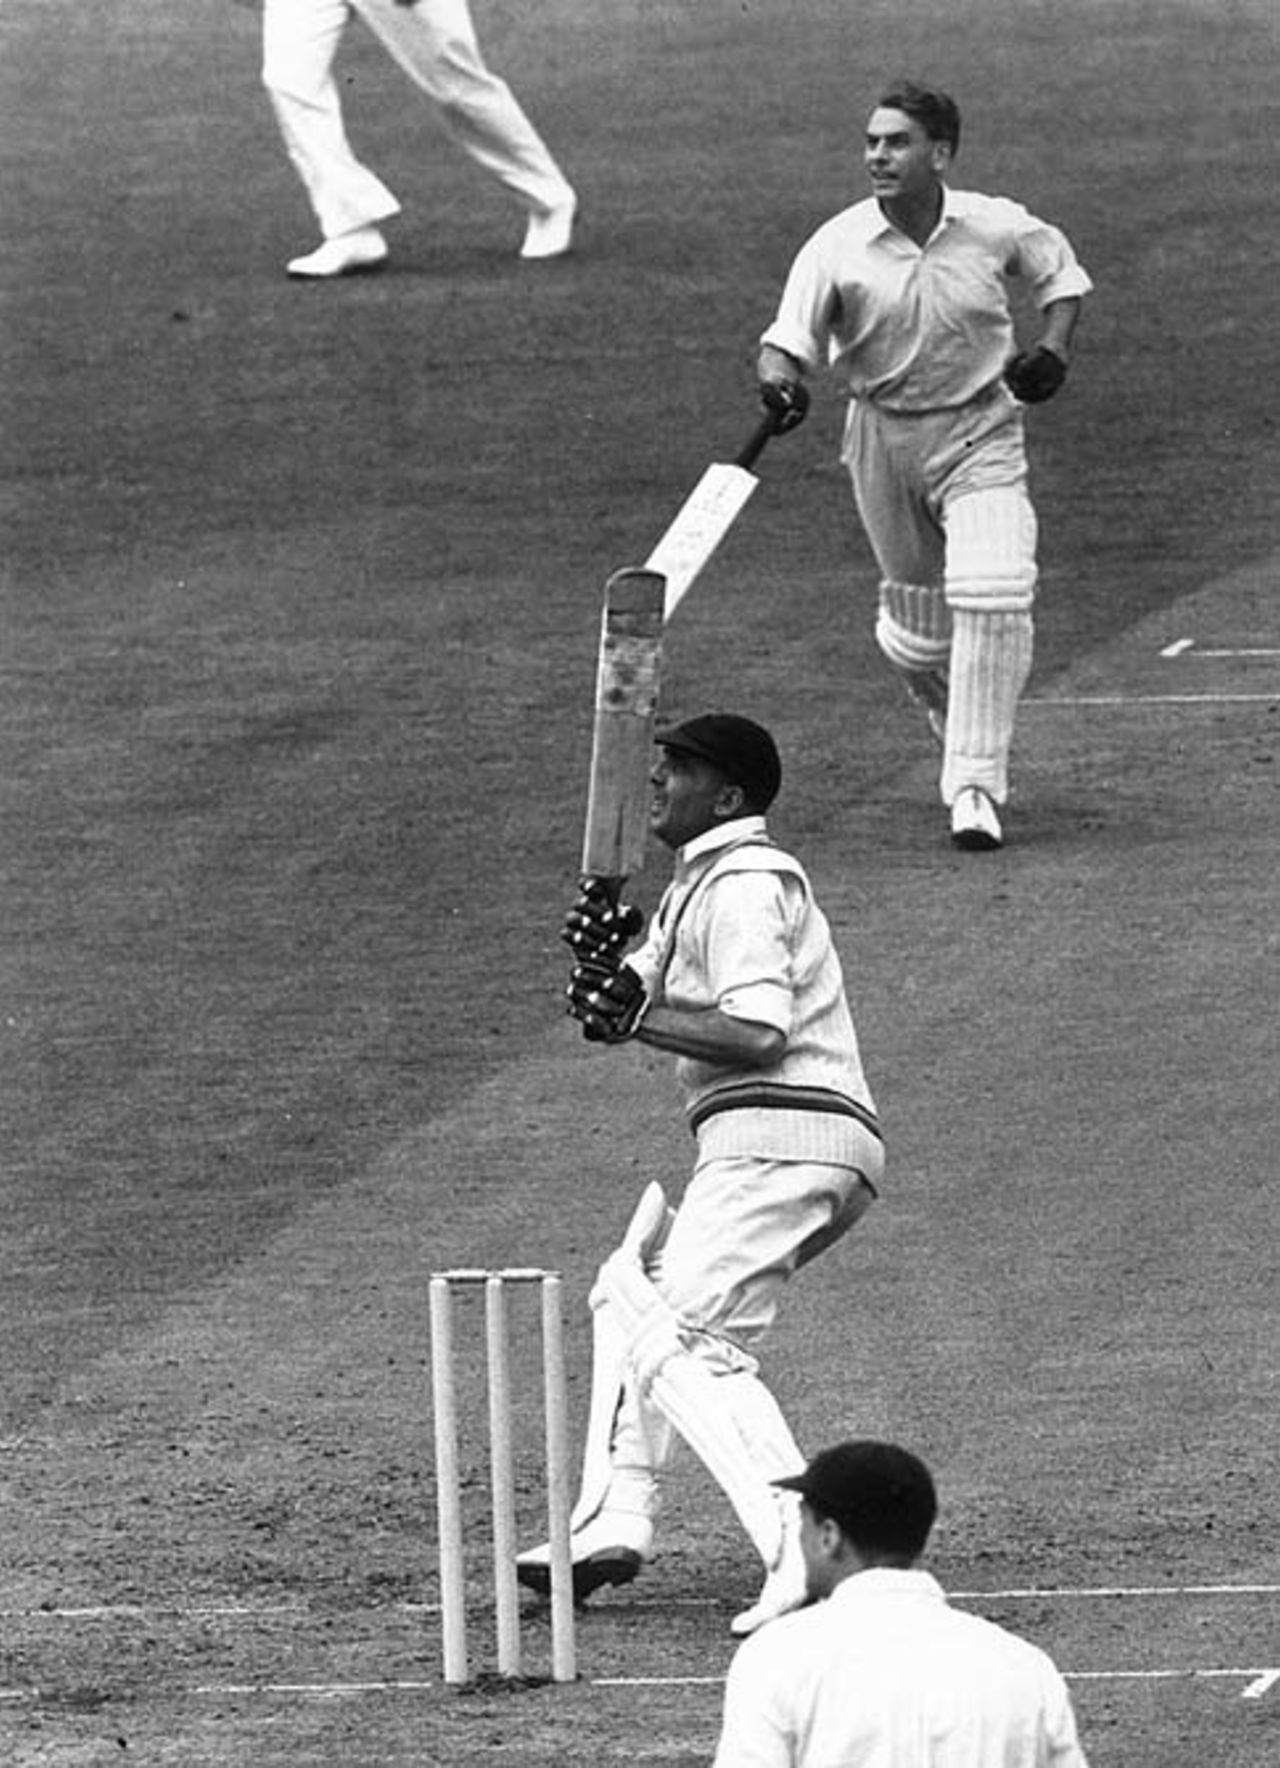 Les Ames plays the pull, Surrey v Kent, County Championship, The Oval, July 13-16, 1946